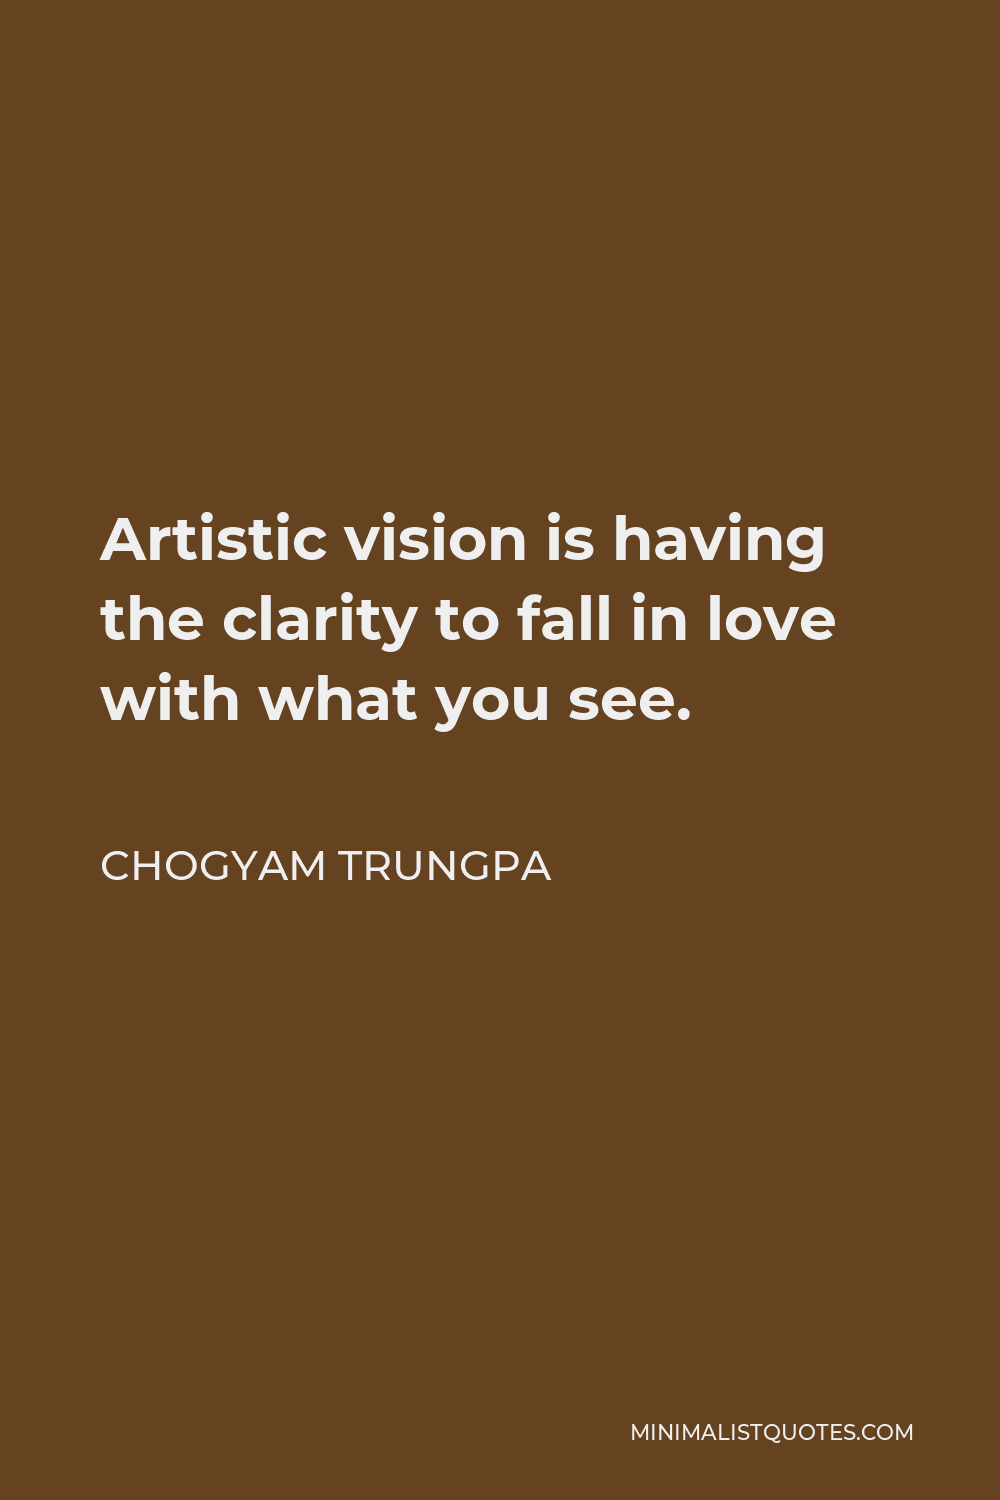 Chogyam Trungpa Quote - Artistic vision is having the clarity to fall in love with what you see.